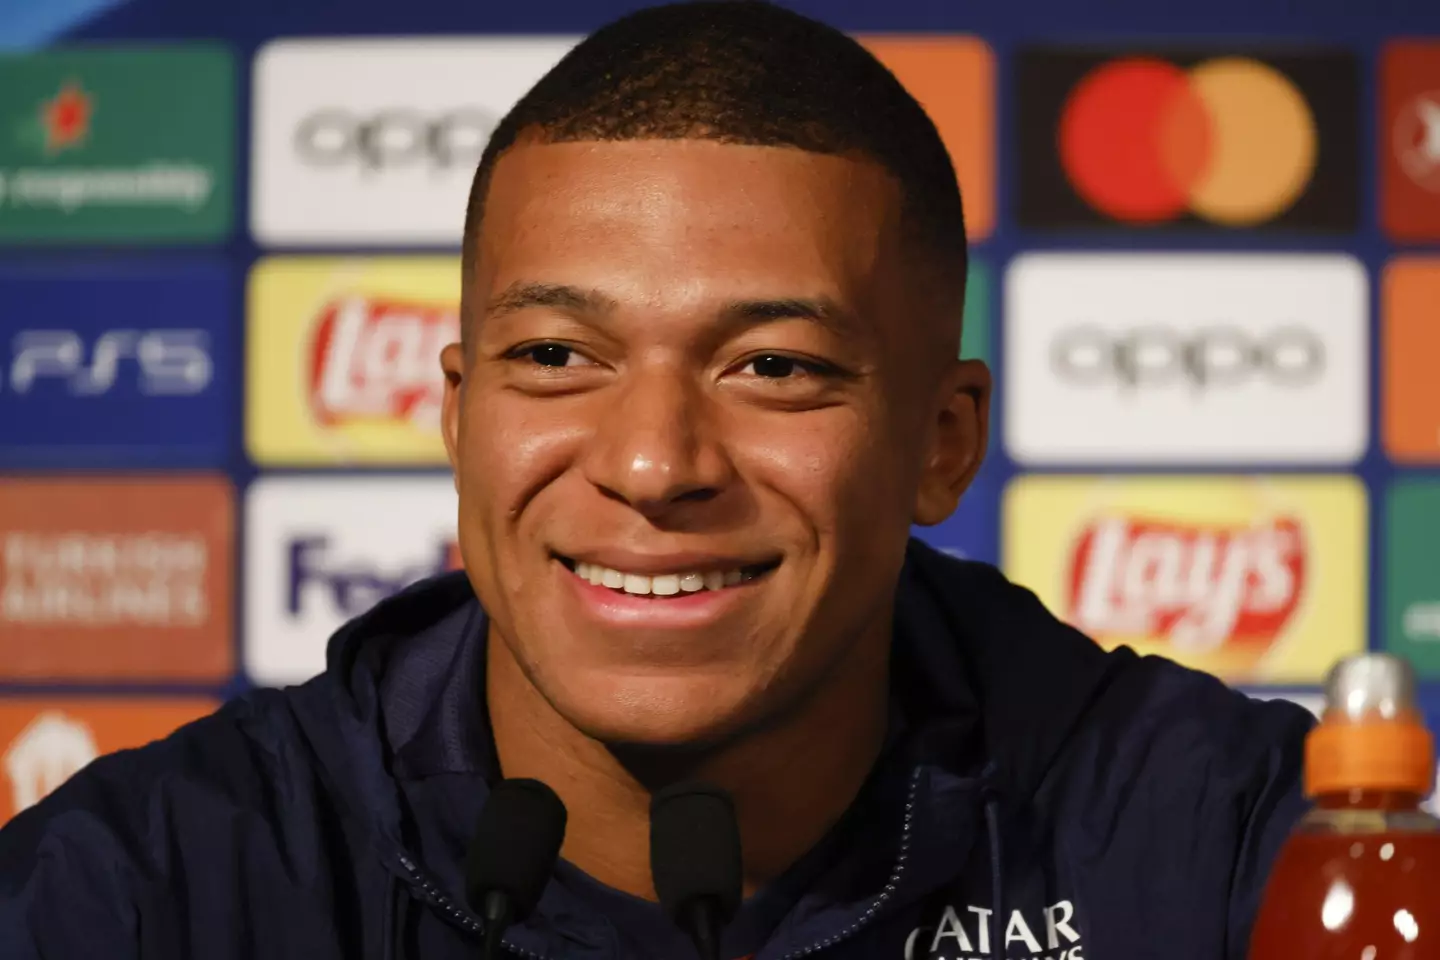 Mbappe in a PSG press conference. (Image